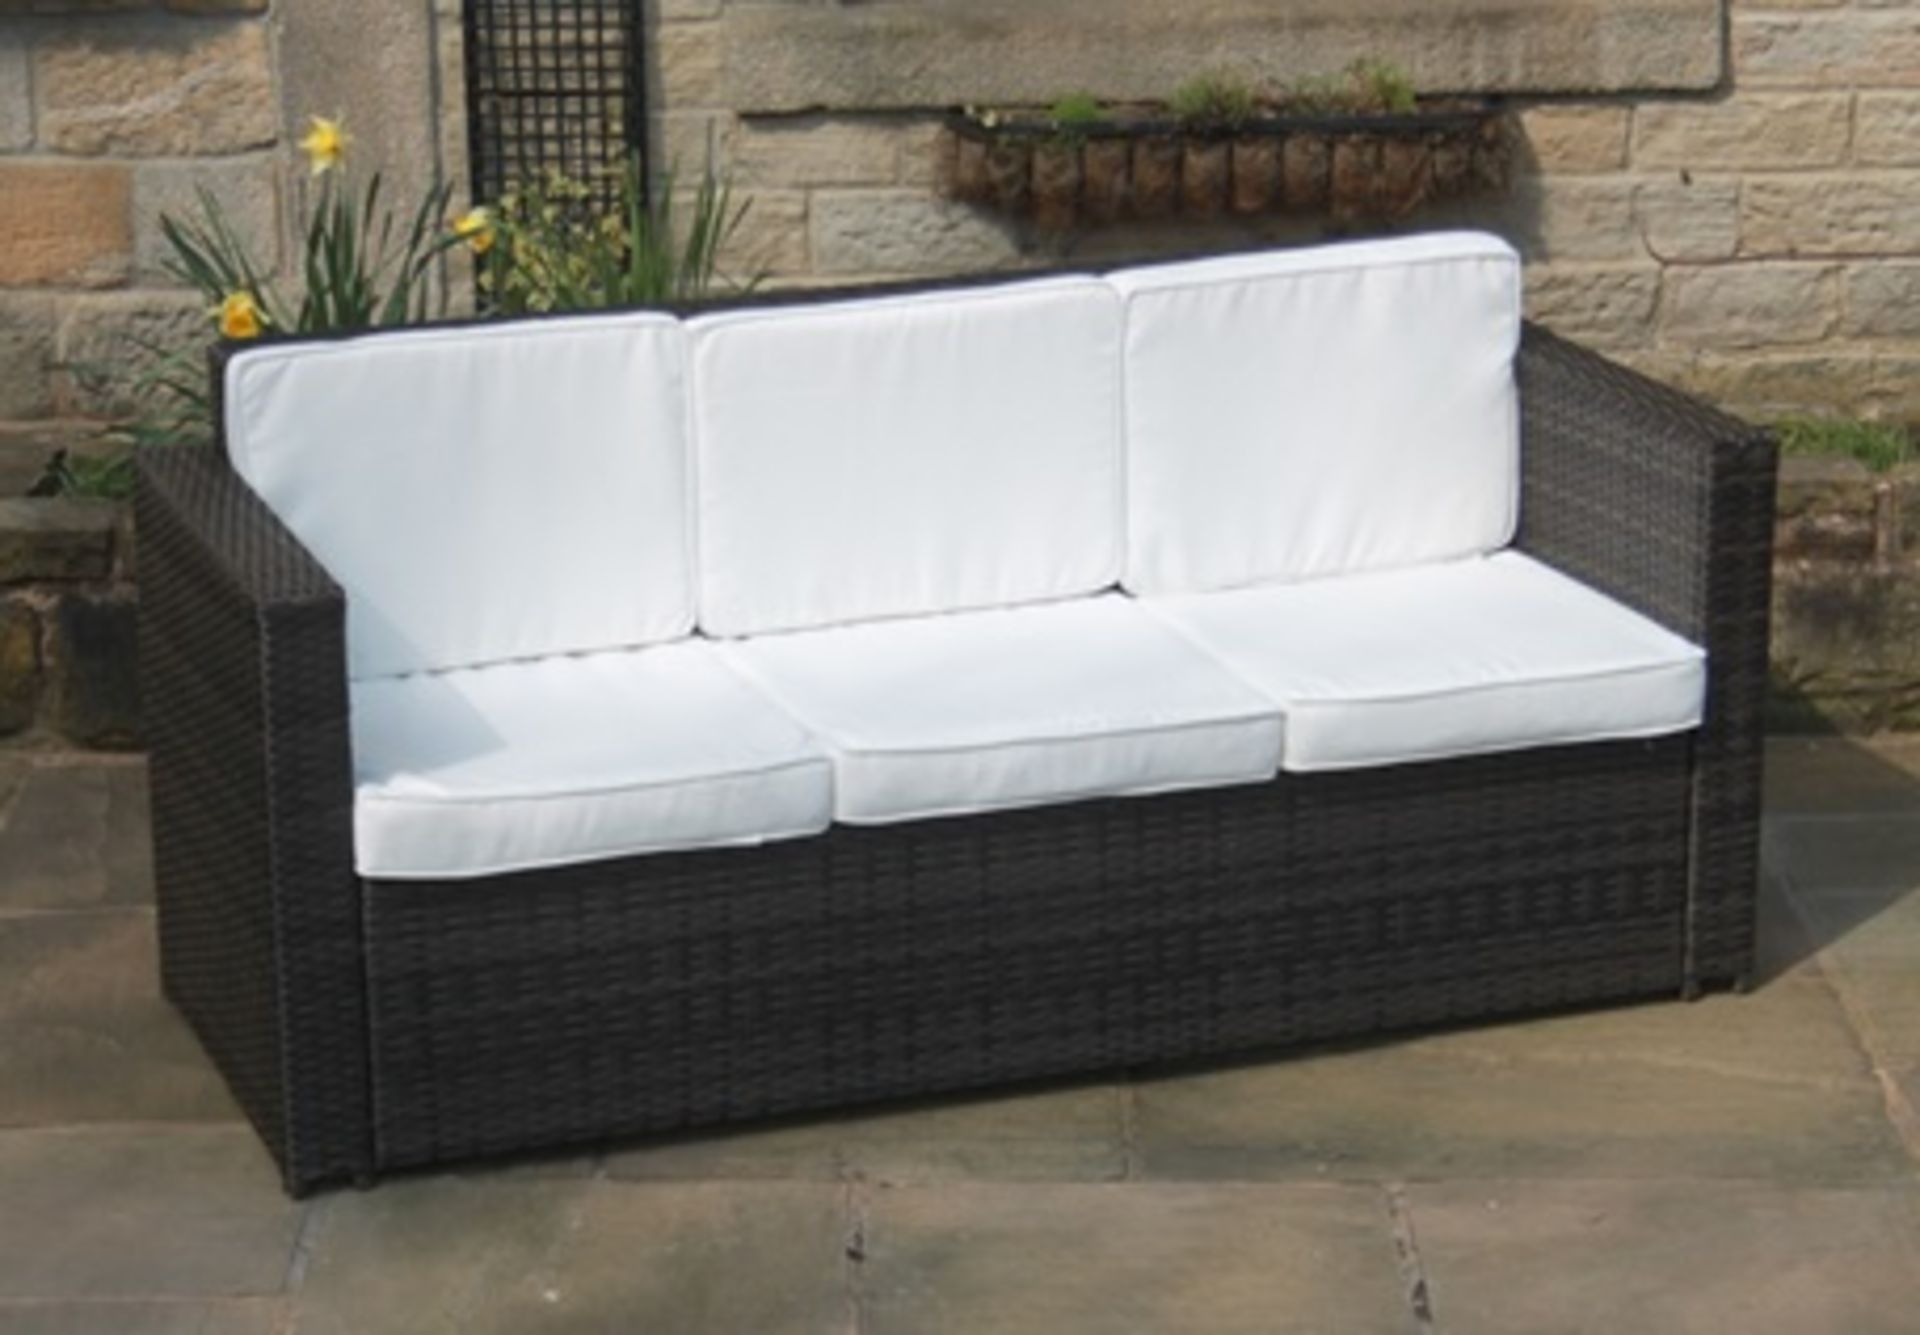 1 BRAND NEW BOXED ALL WEATHER BLACK RATTAN 3 SEATE